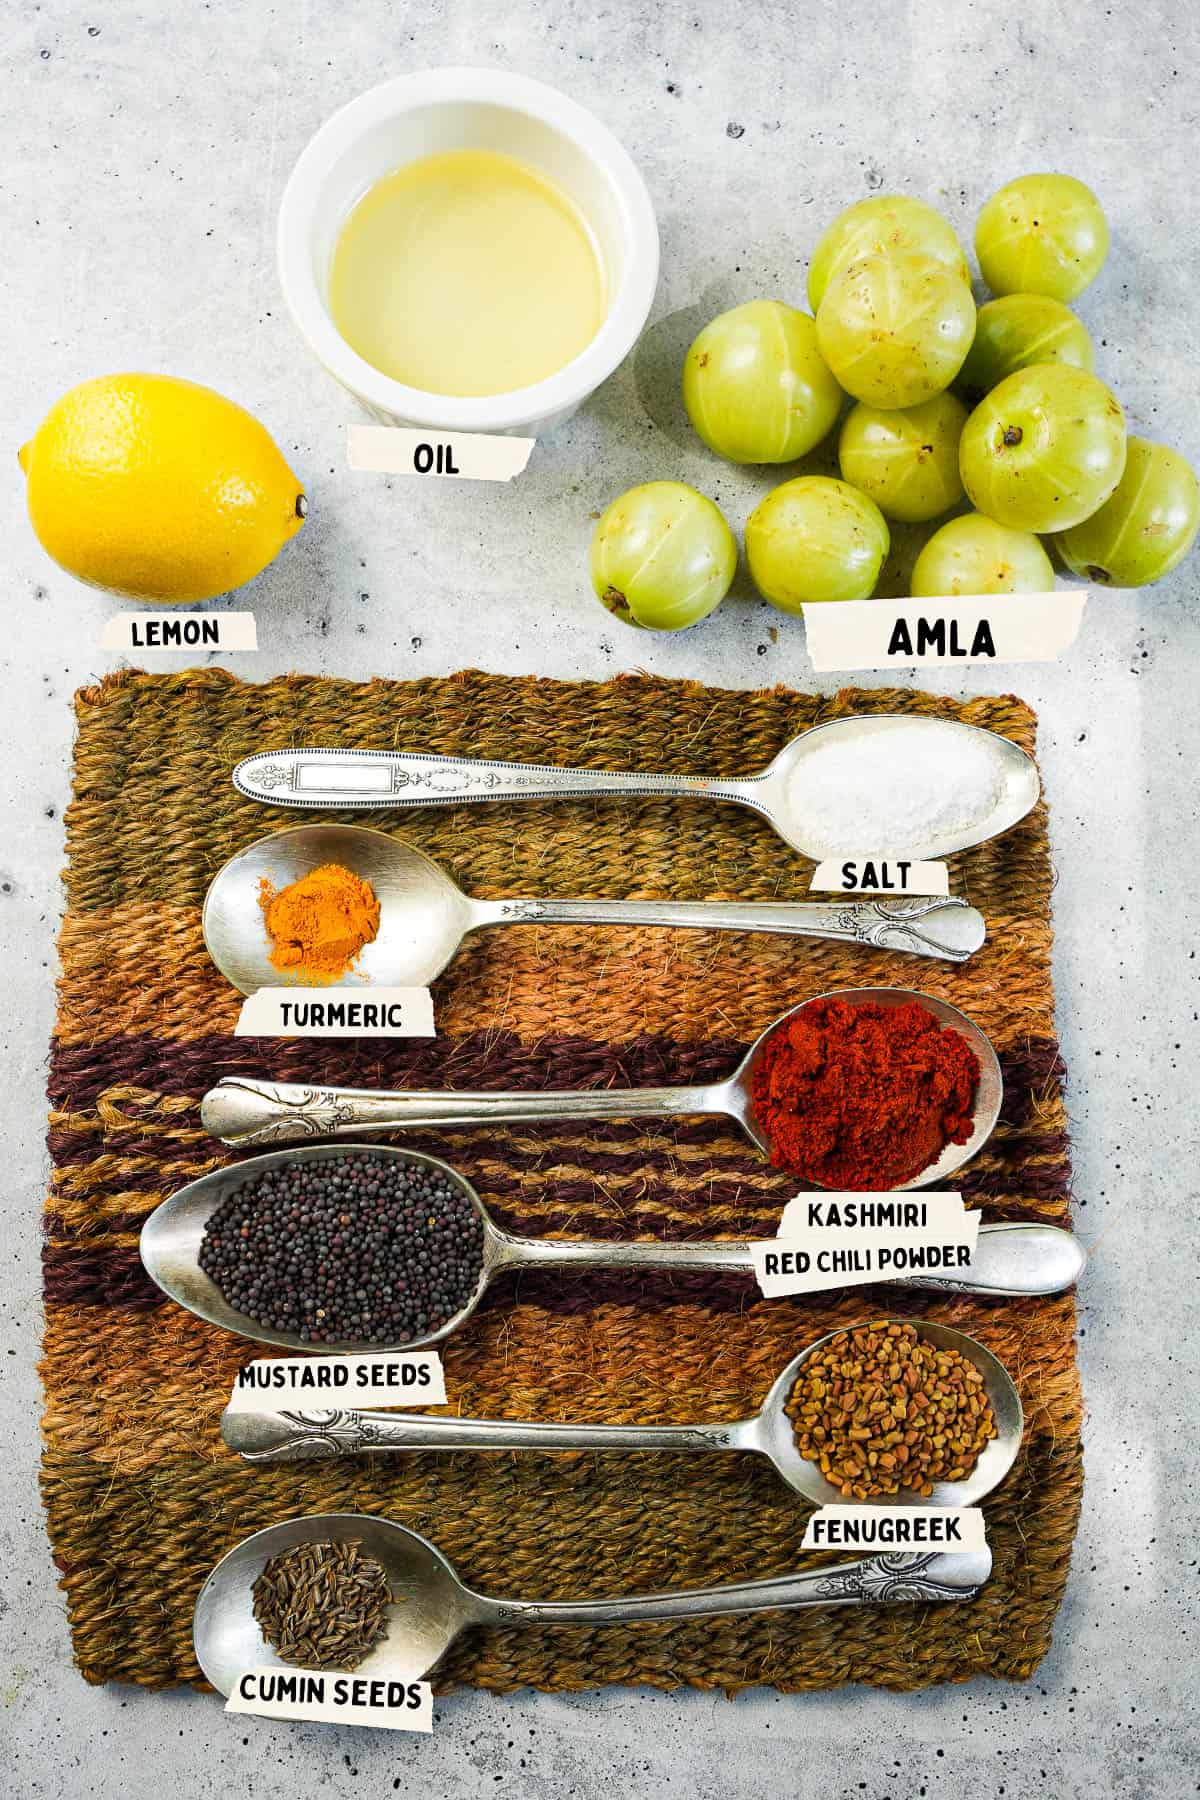 A woven mat with spices and ingredients measured out and labeled for making pickled amla on it.